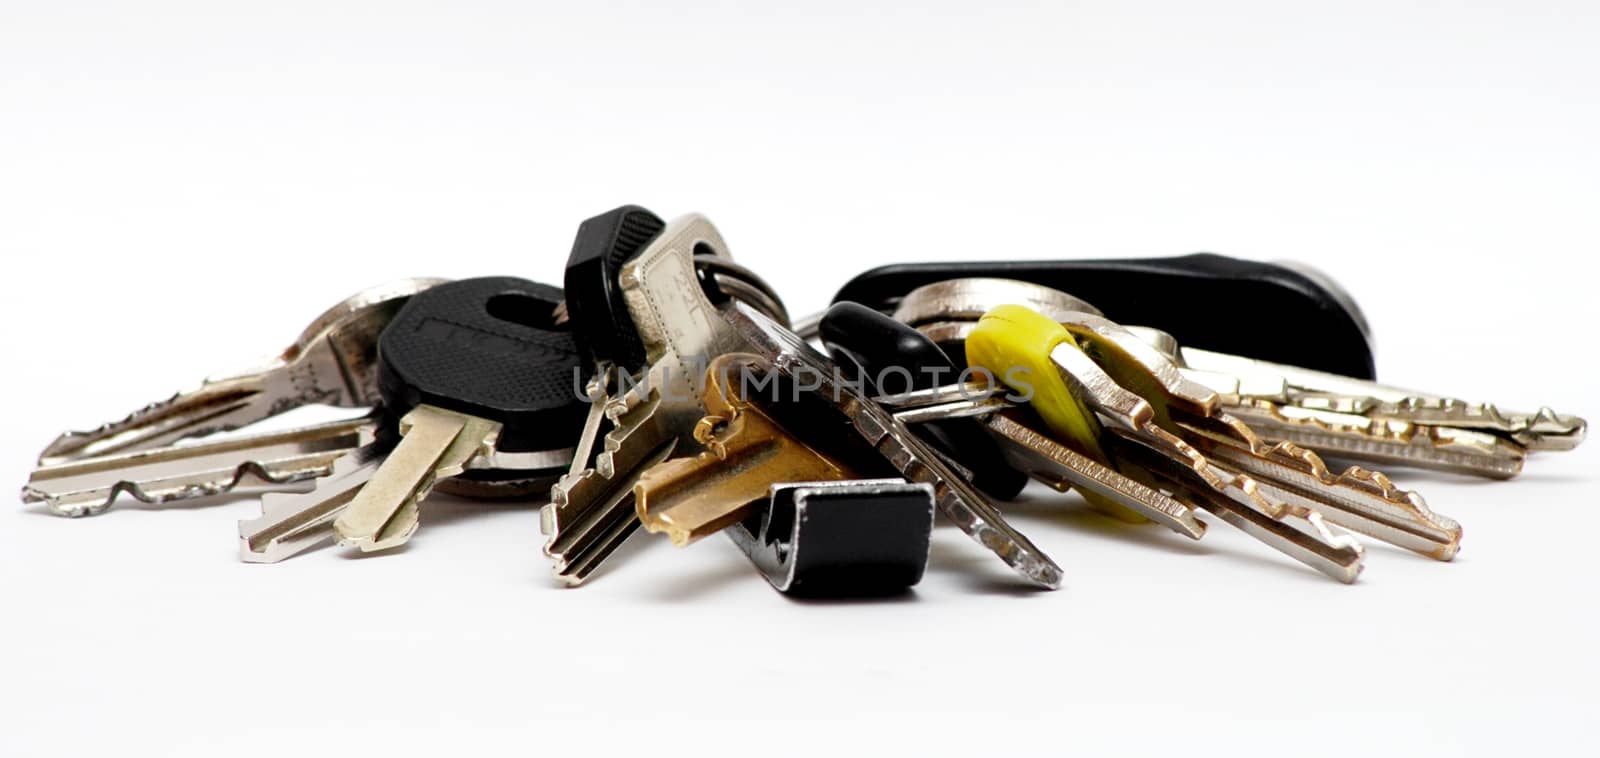 Group of keys on the white background.